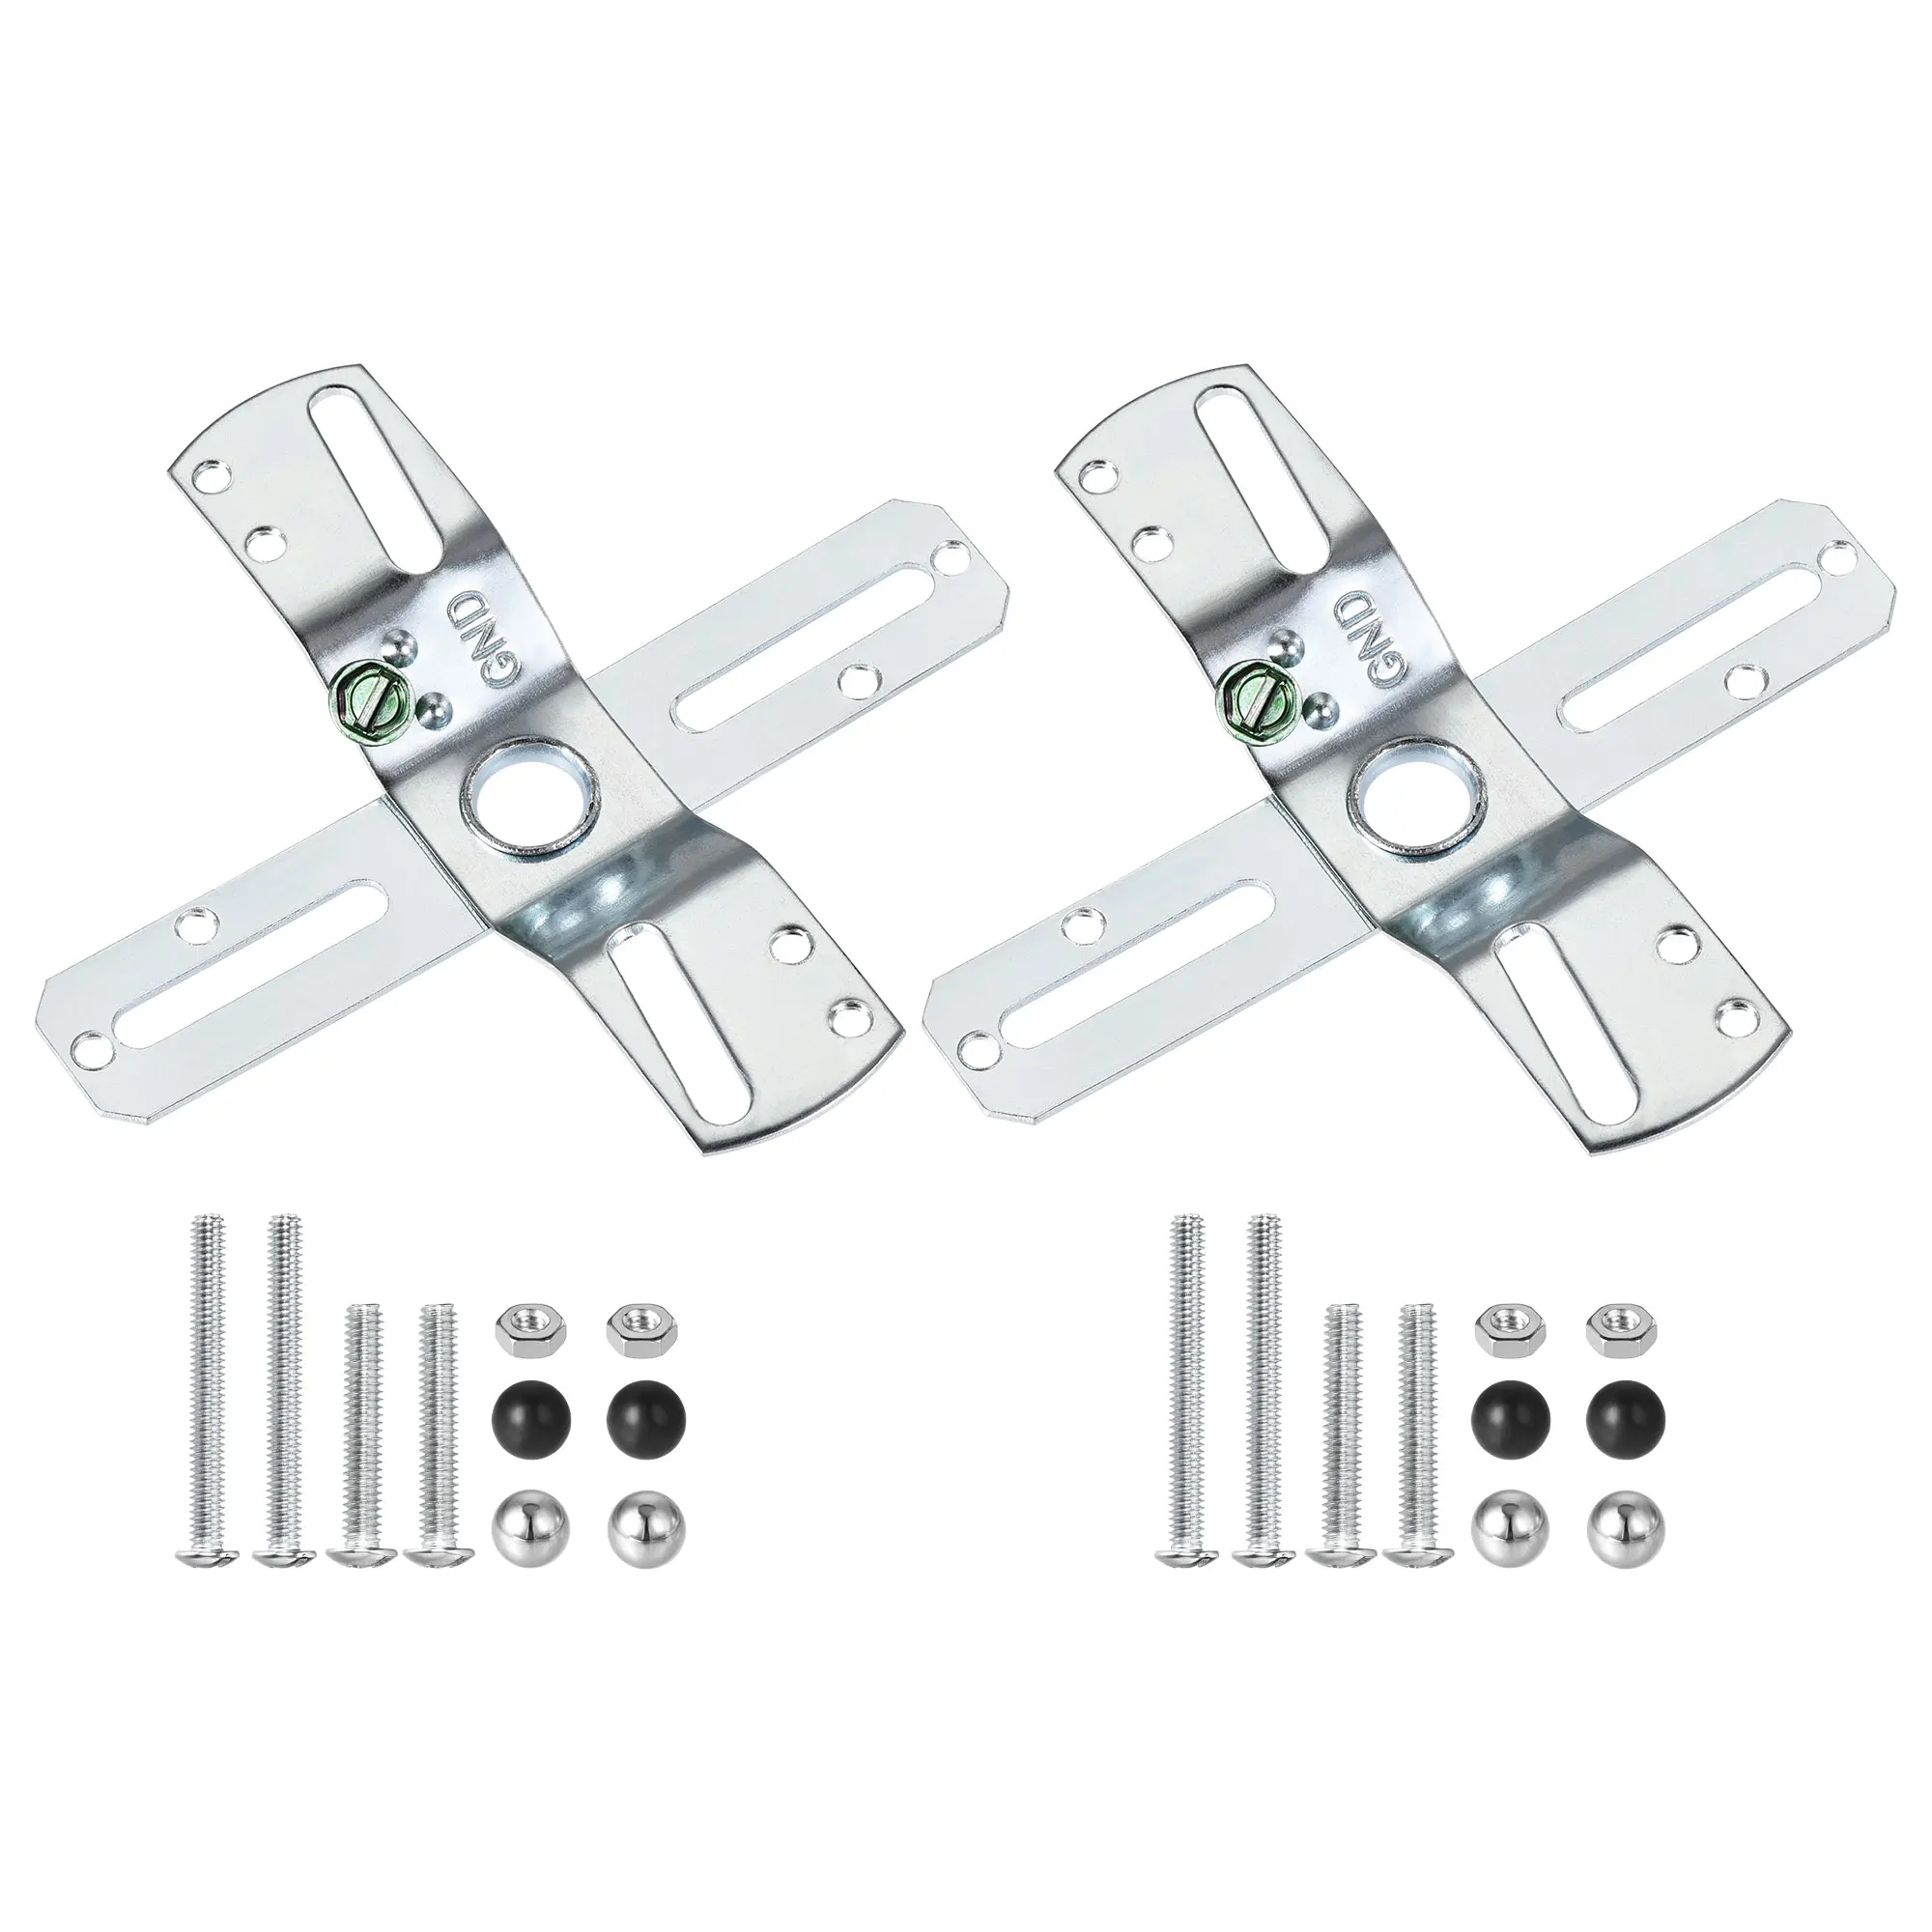 

2pcs Light Crossbar Kit 4Inch Cross-Shaped Mounting Bracket Universal Lighting Fixture with Screws and Nuts for Chandelier Light